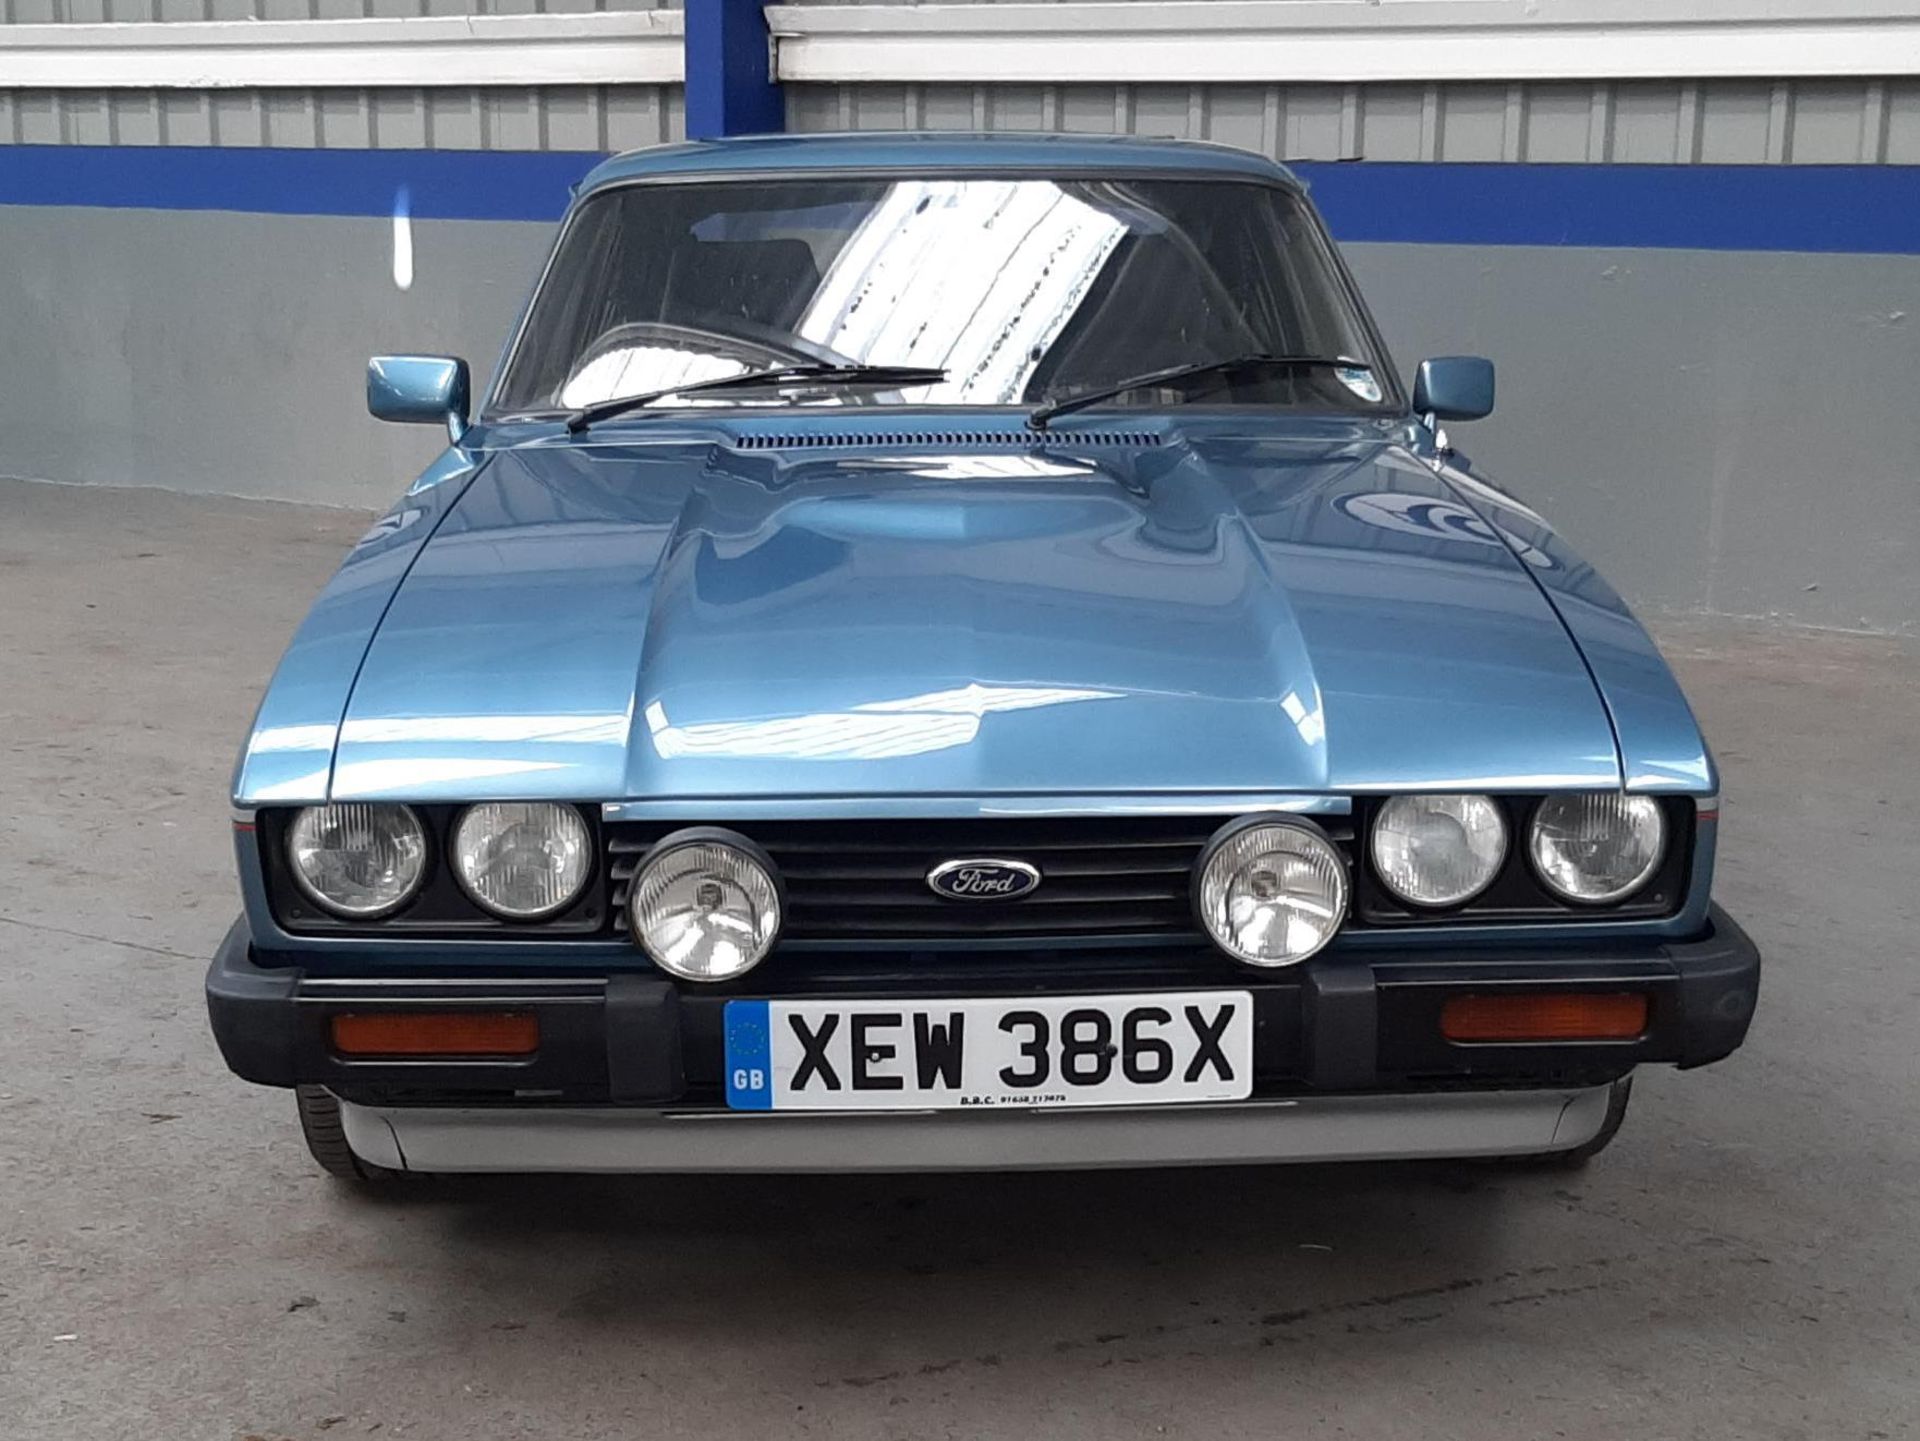 1982 Ford Capri 2.8 Injection - Image 2 of 23